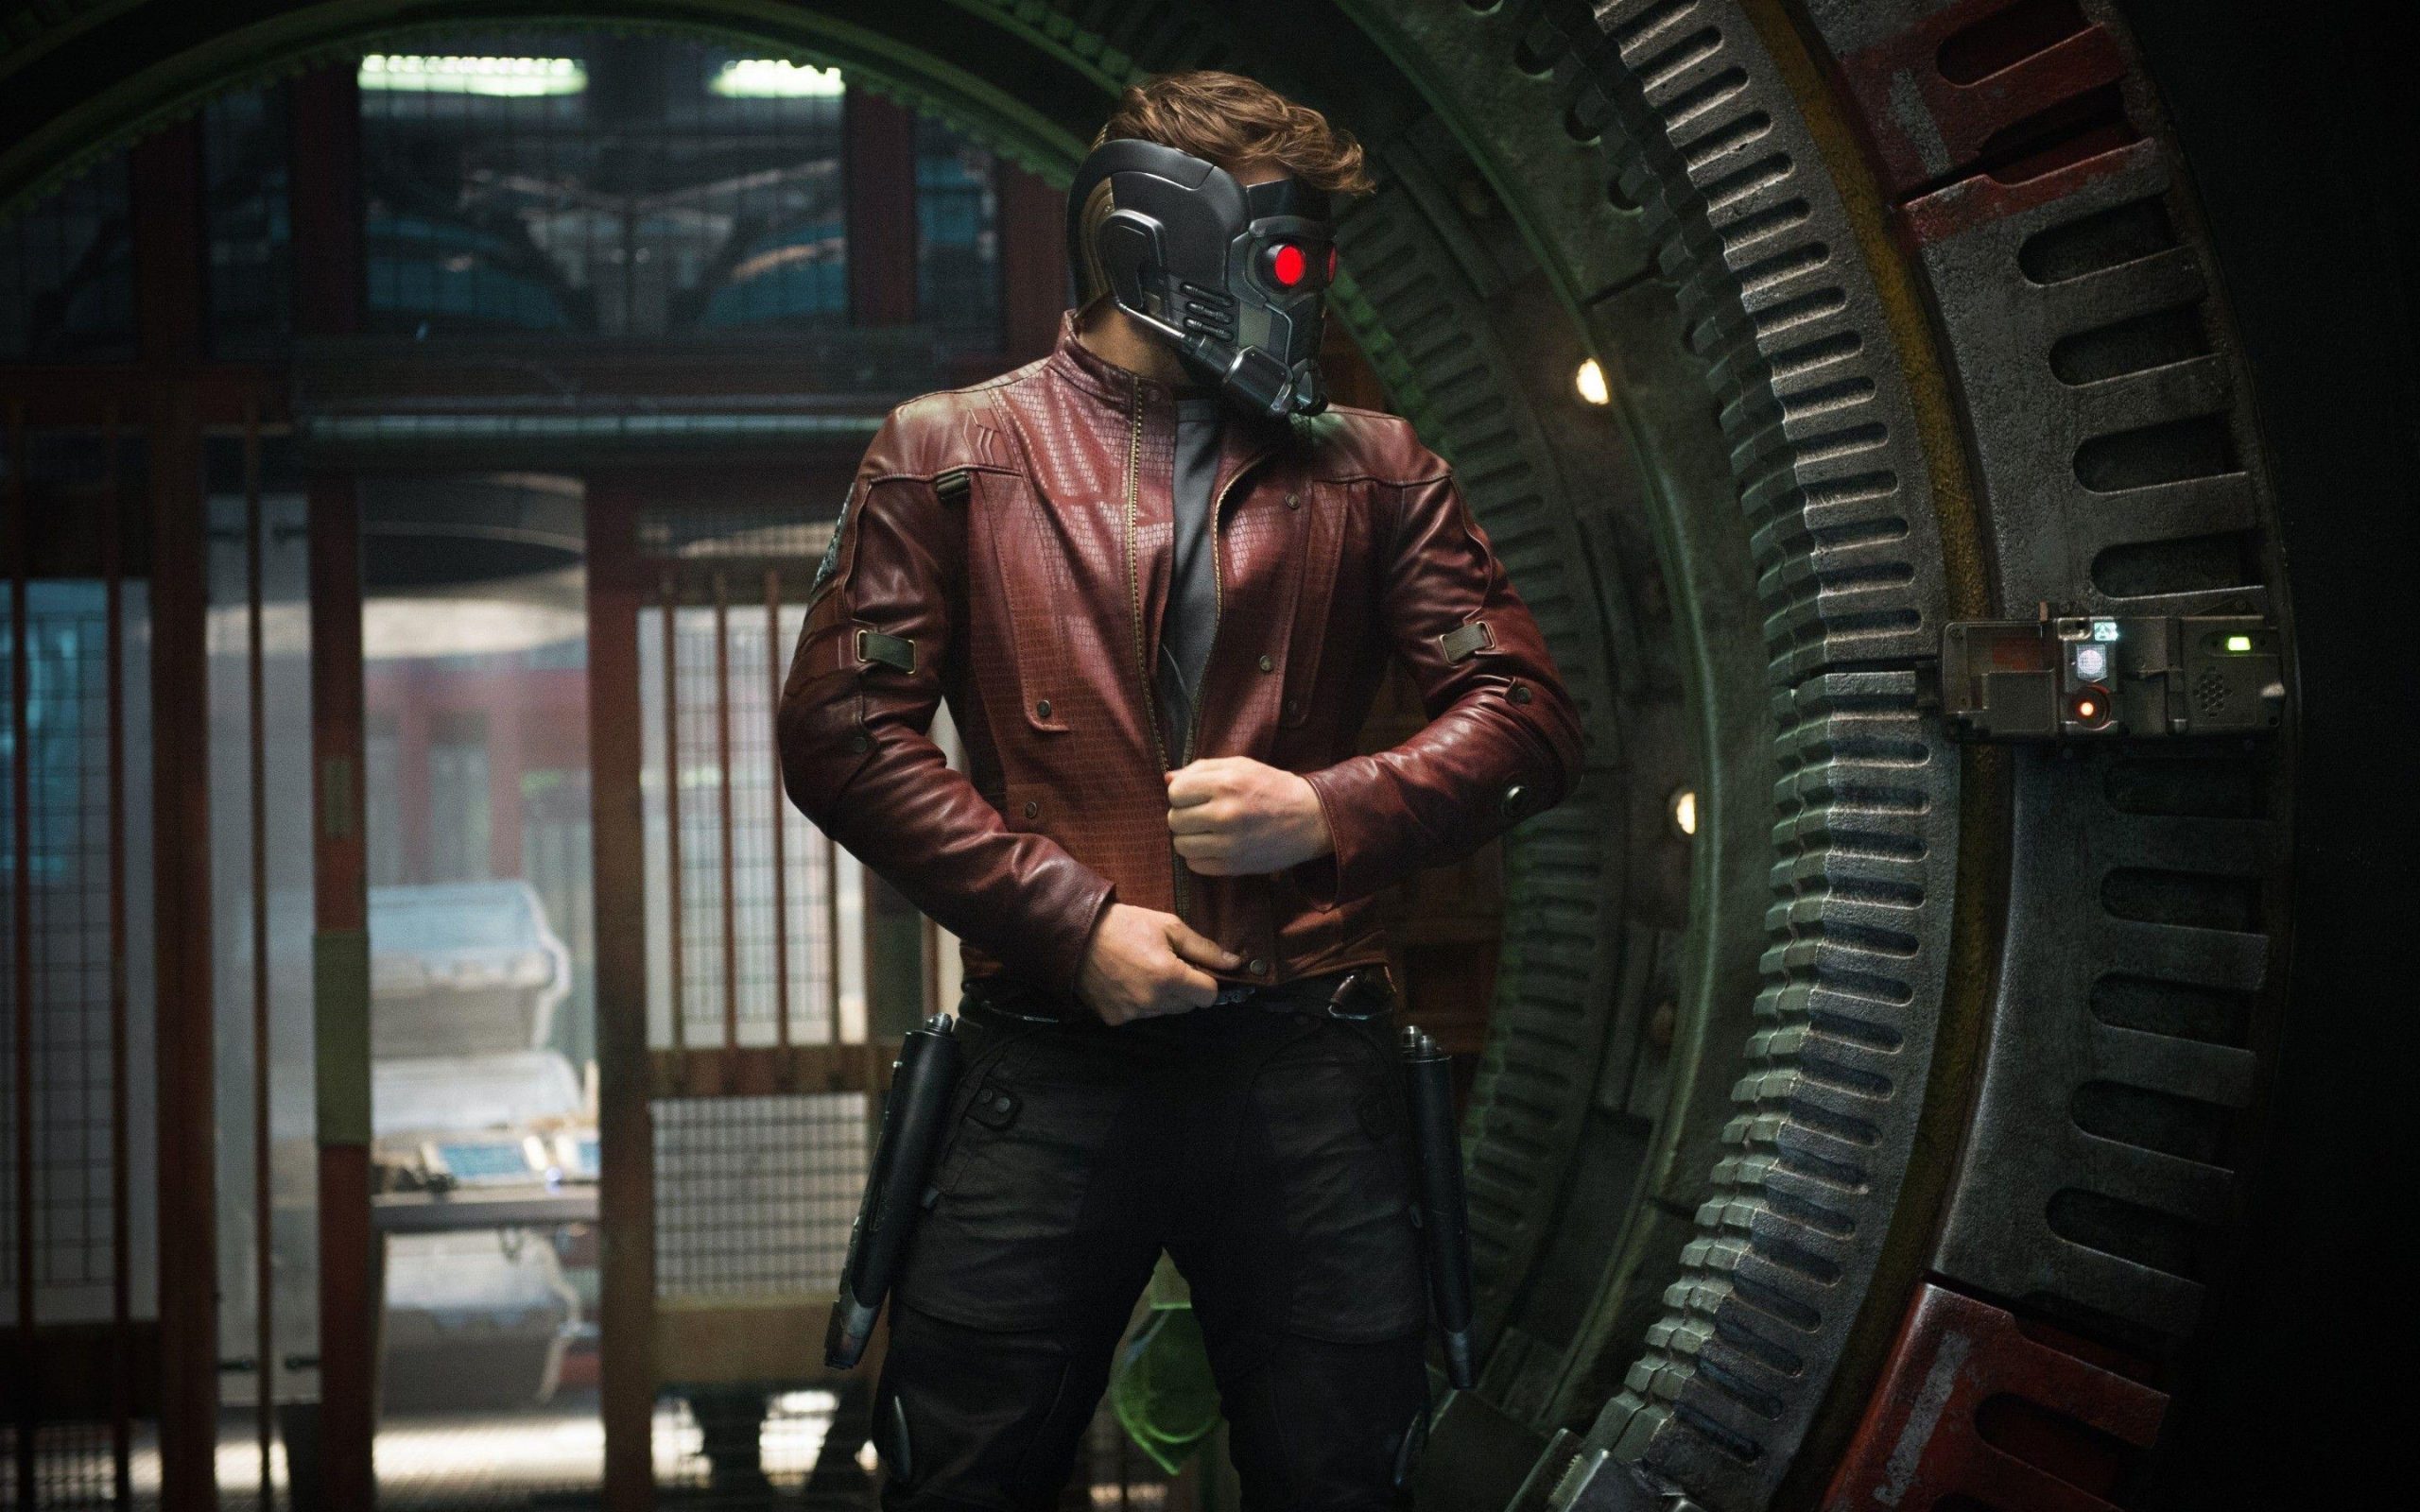 Star lord Captions For Instagram